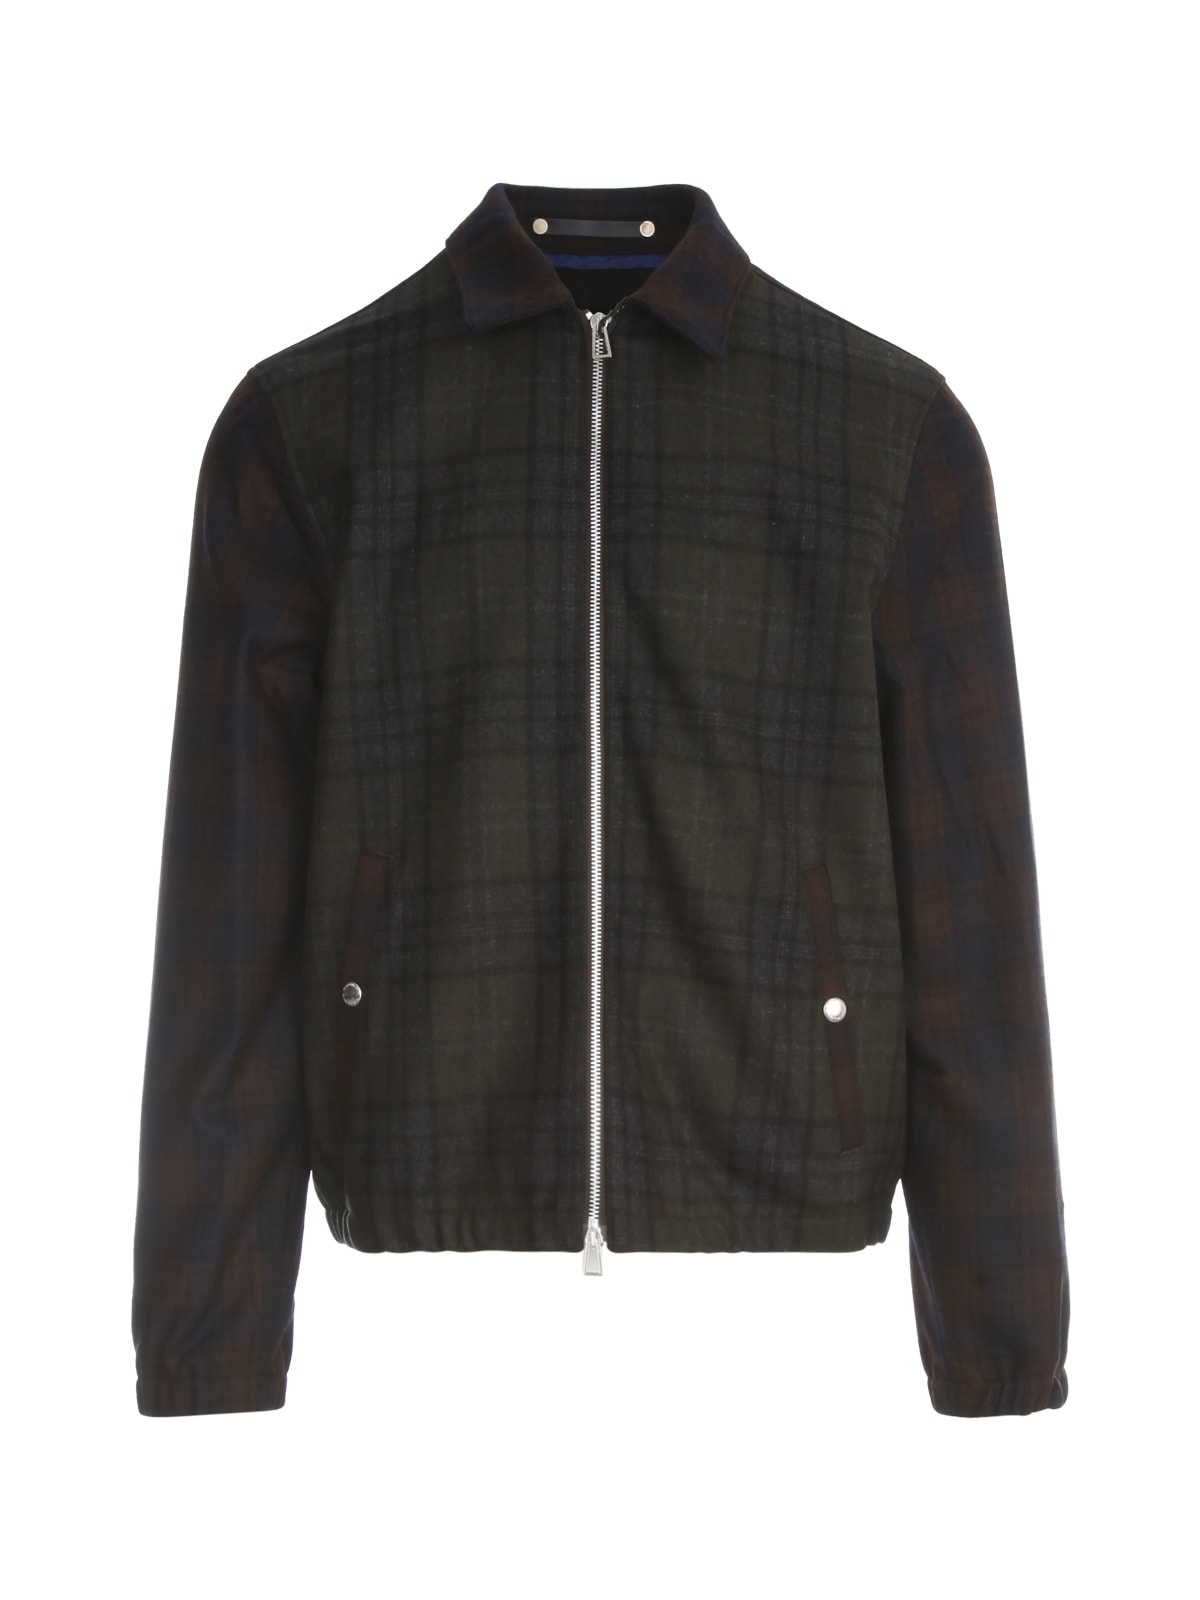 PS by Paul Smith Mens Coaches Jacket Mixed